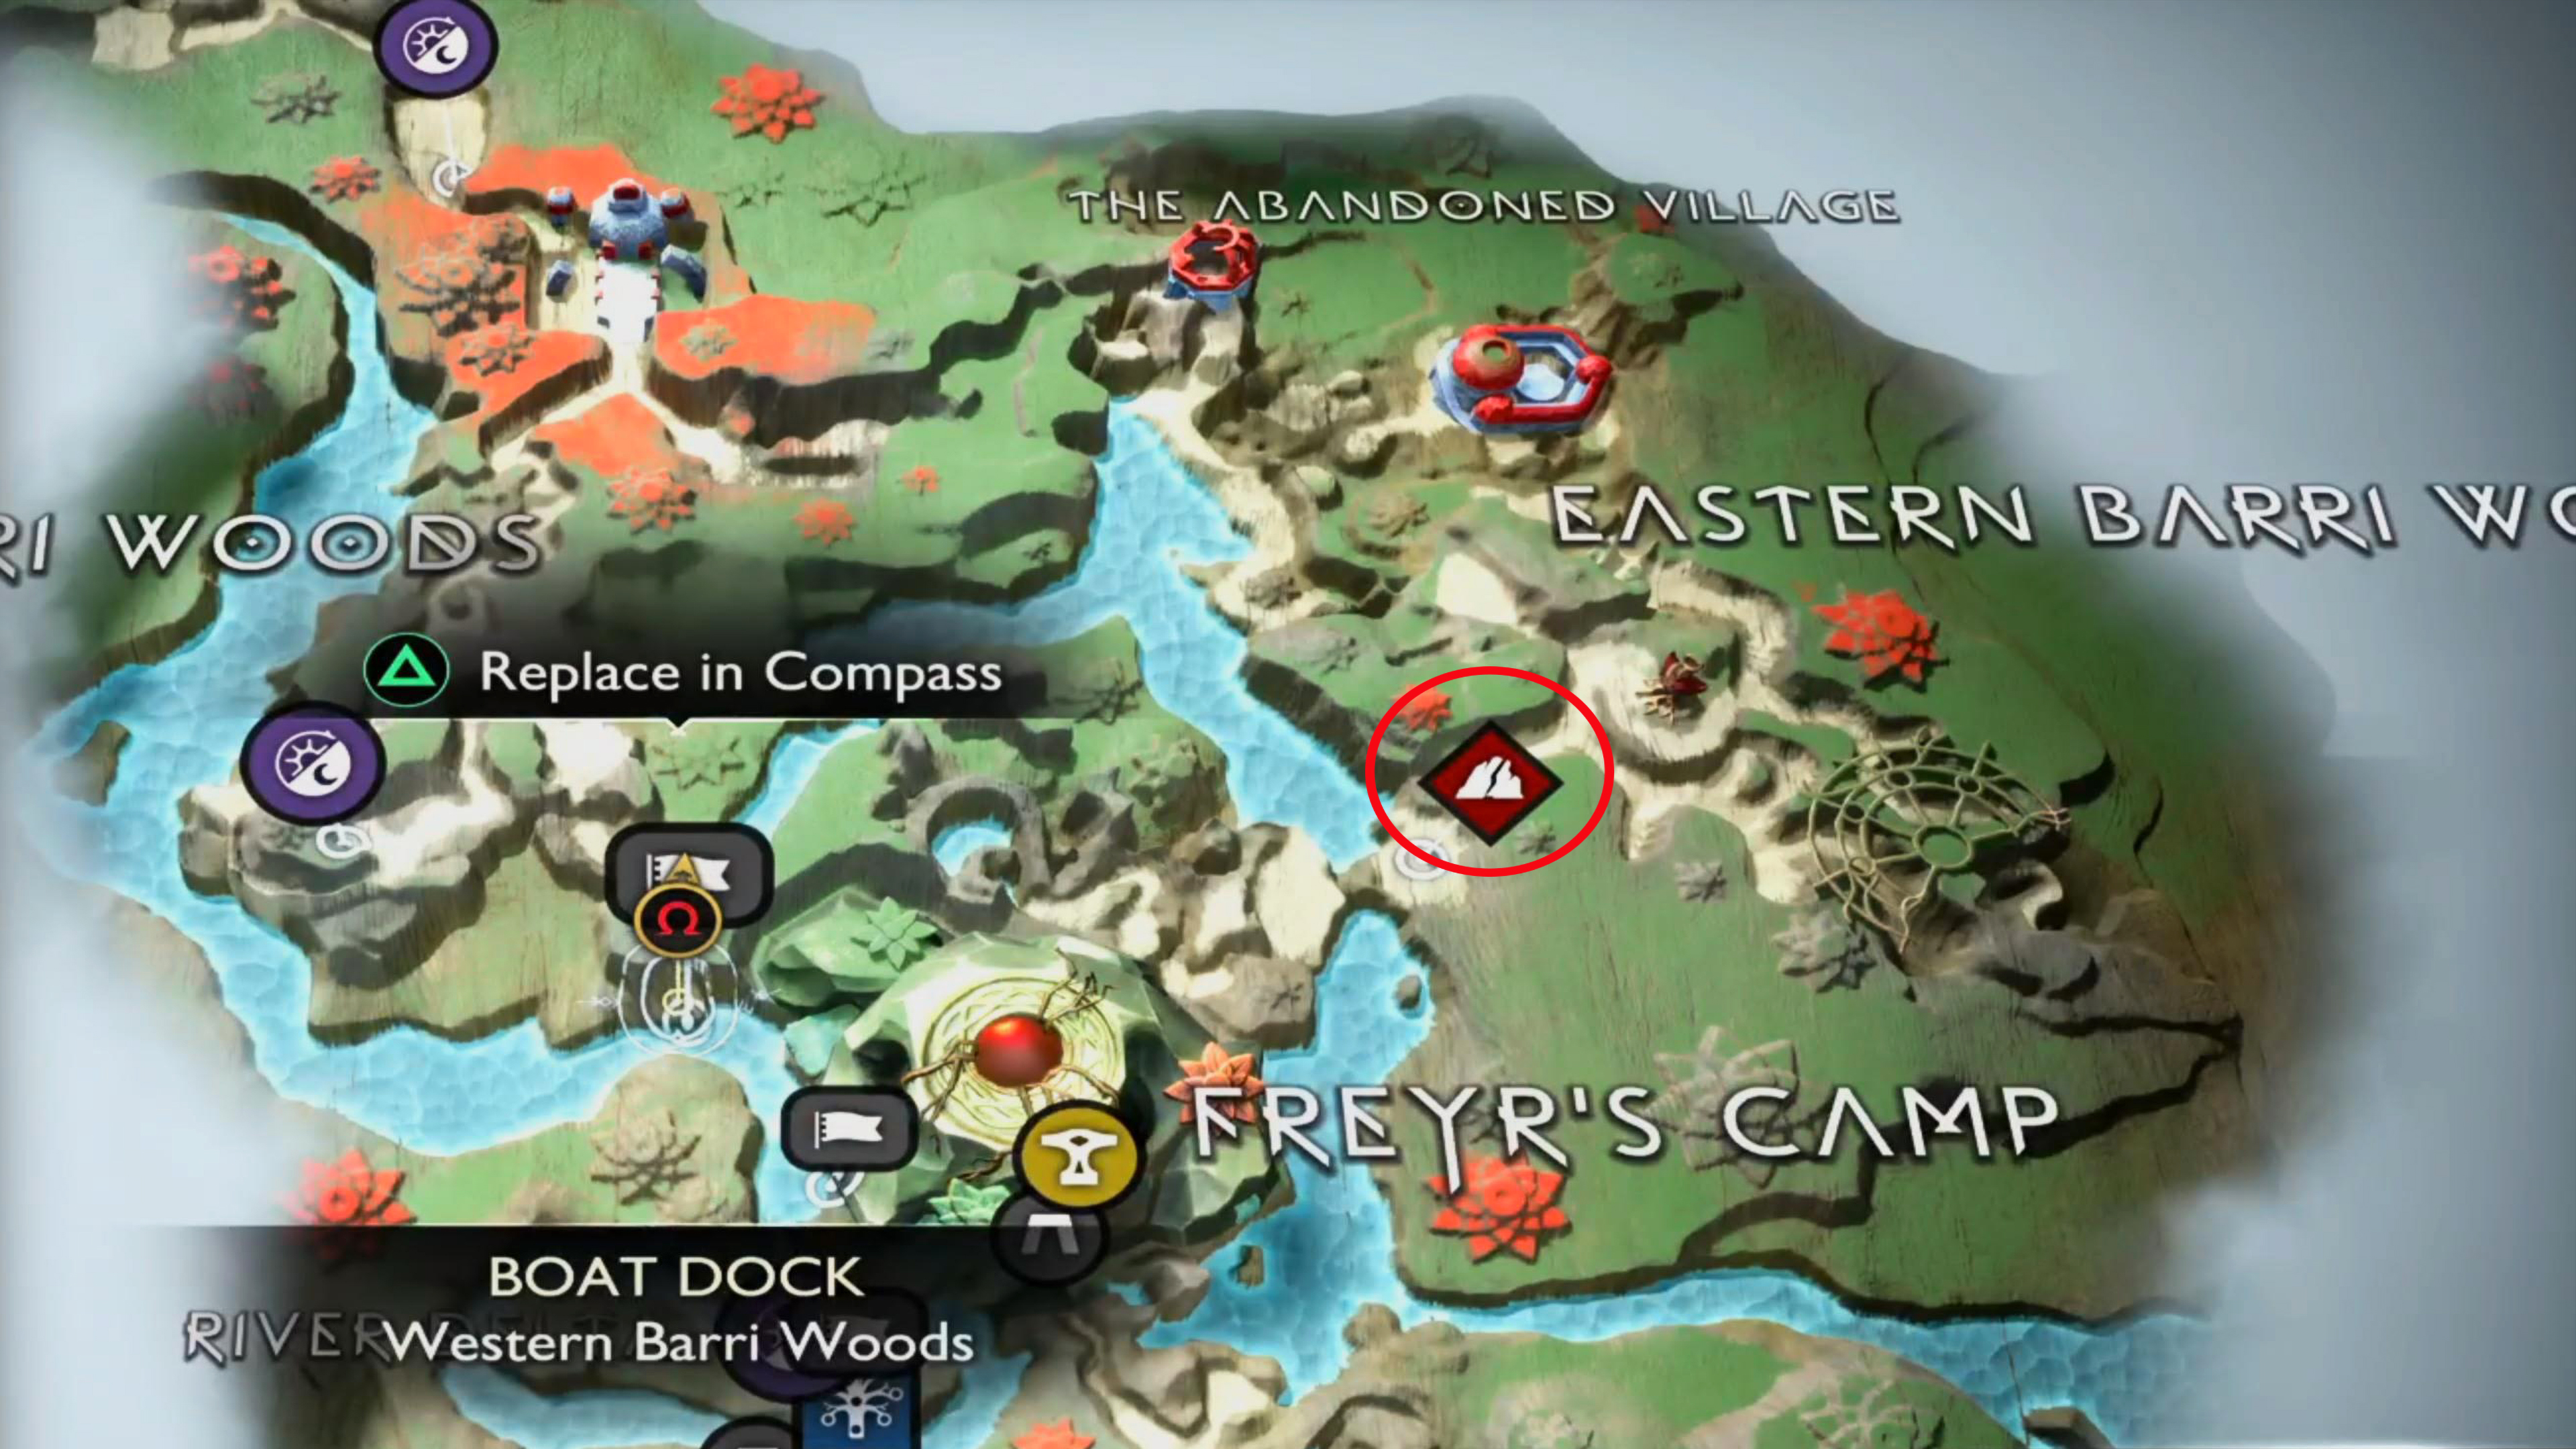 To reach the Eastern Barri Woods remnant camp, you’ll need to leave Freyr’s Camp from the gates to the east.